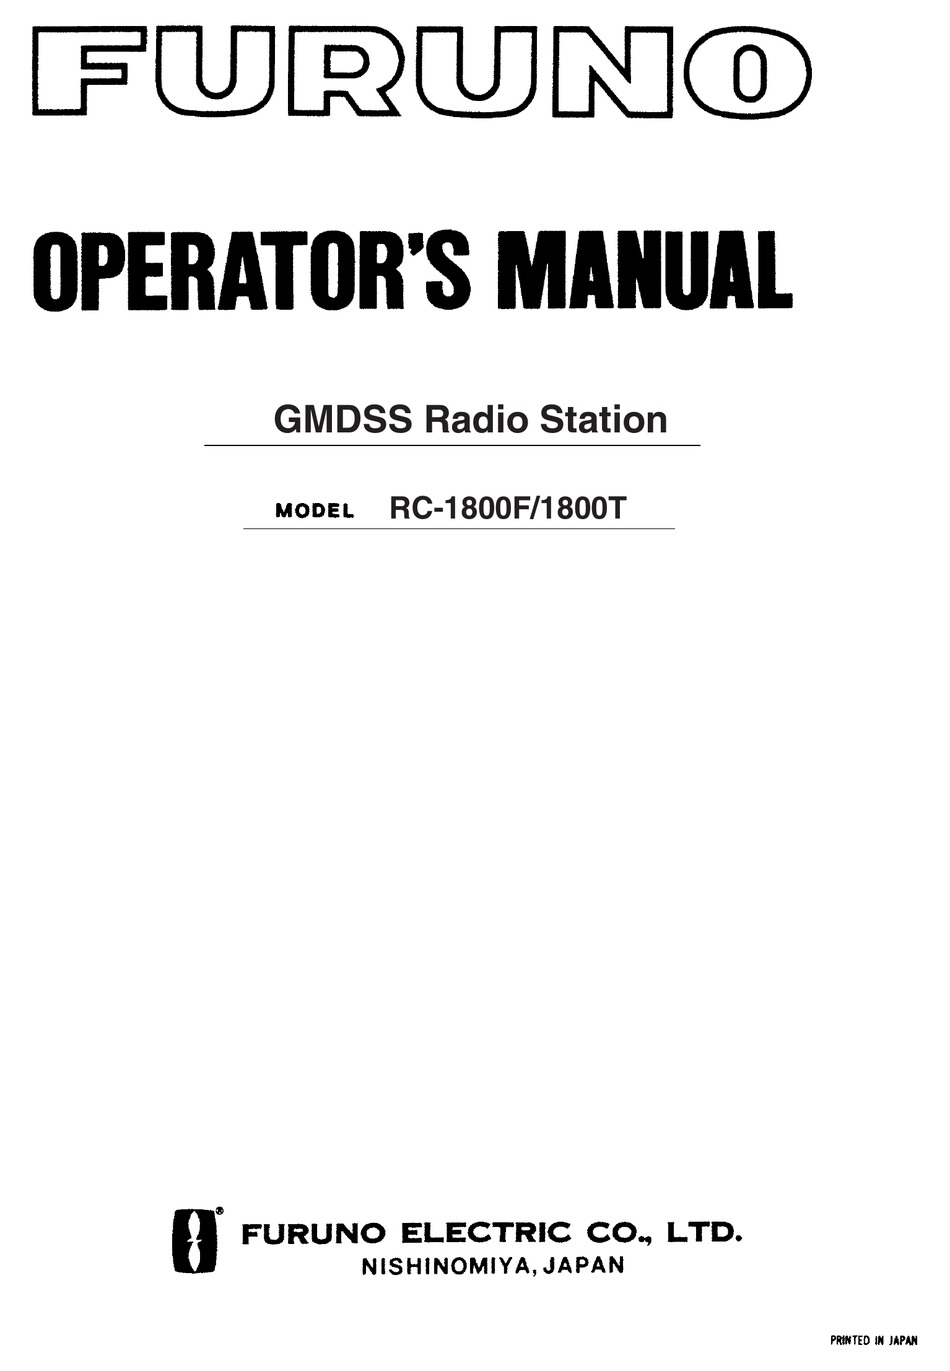 Free download Manual For S-25E Electronic Safe programs